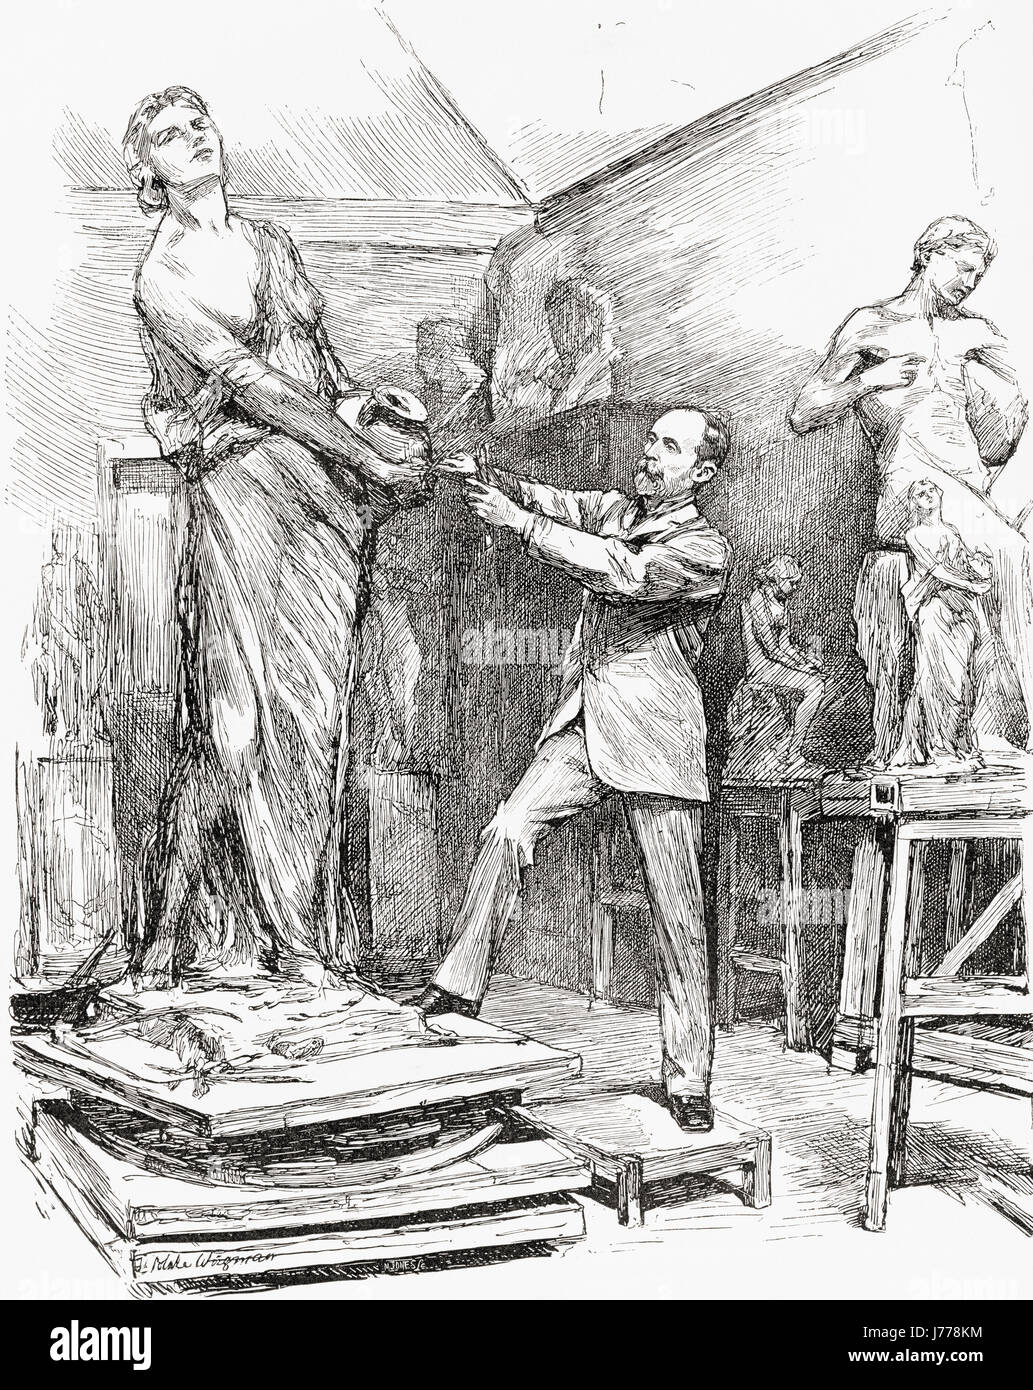 George A. Lawson at work in his studio.  George Anderson Lawson,  1832 – 1904.  English sculptor.  After a drawing by Theodore Blake Wirgman.  From The Century Illustrated Monthly Magazine, May 1883 - October 1883. Stock Photo